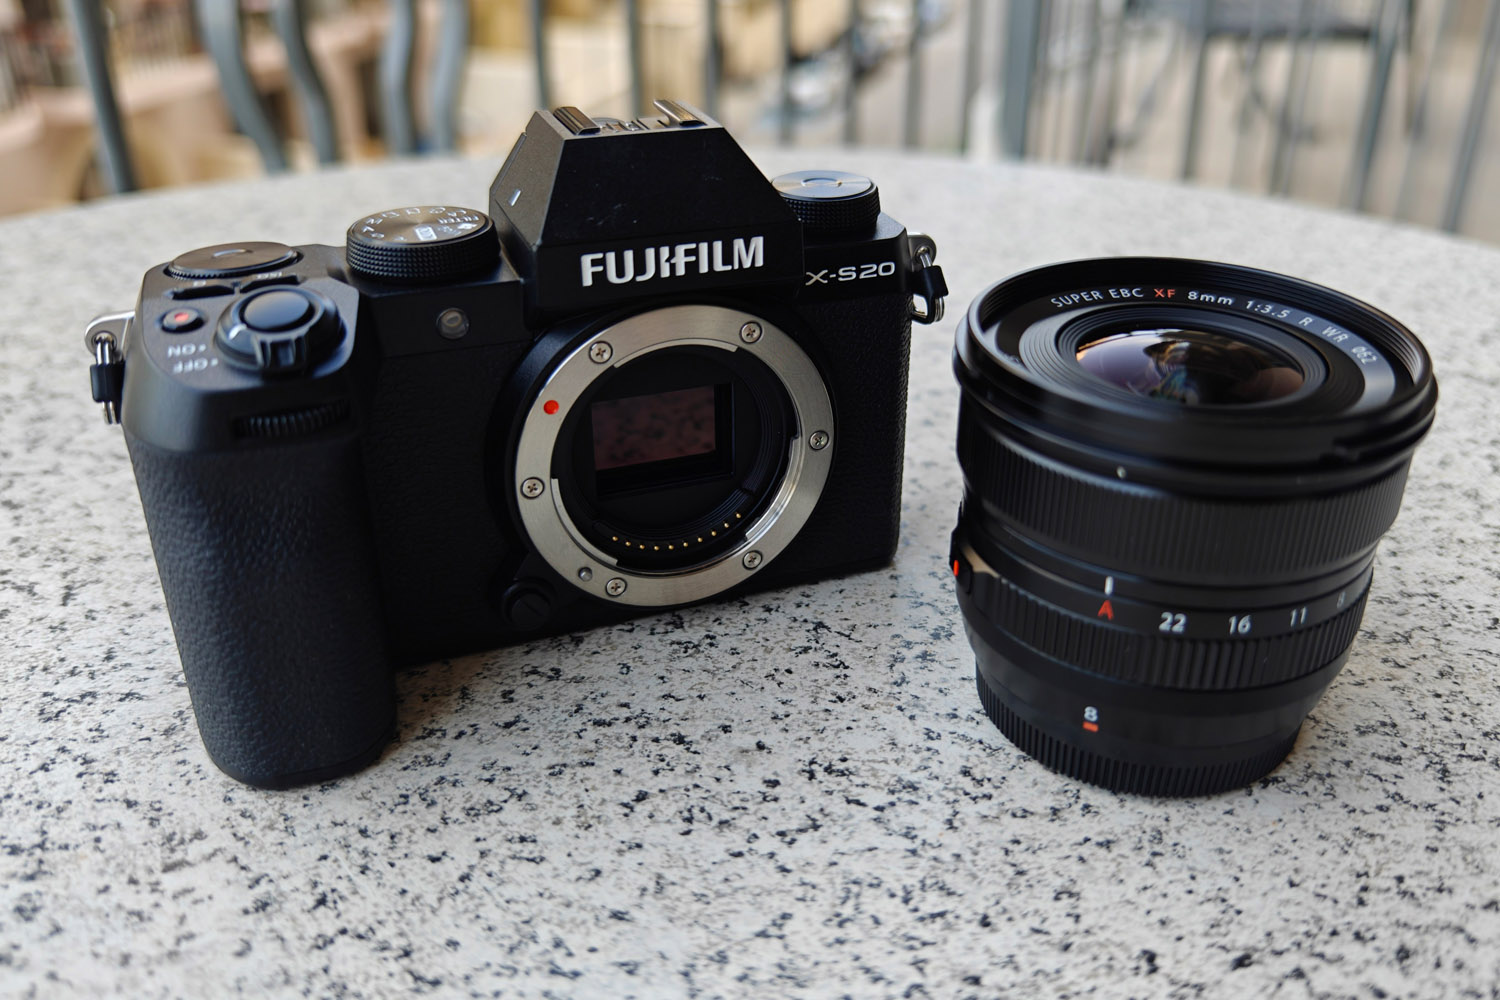 Fujifilm X-S20 hands-on with lens